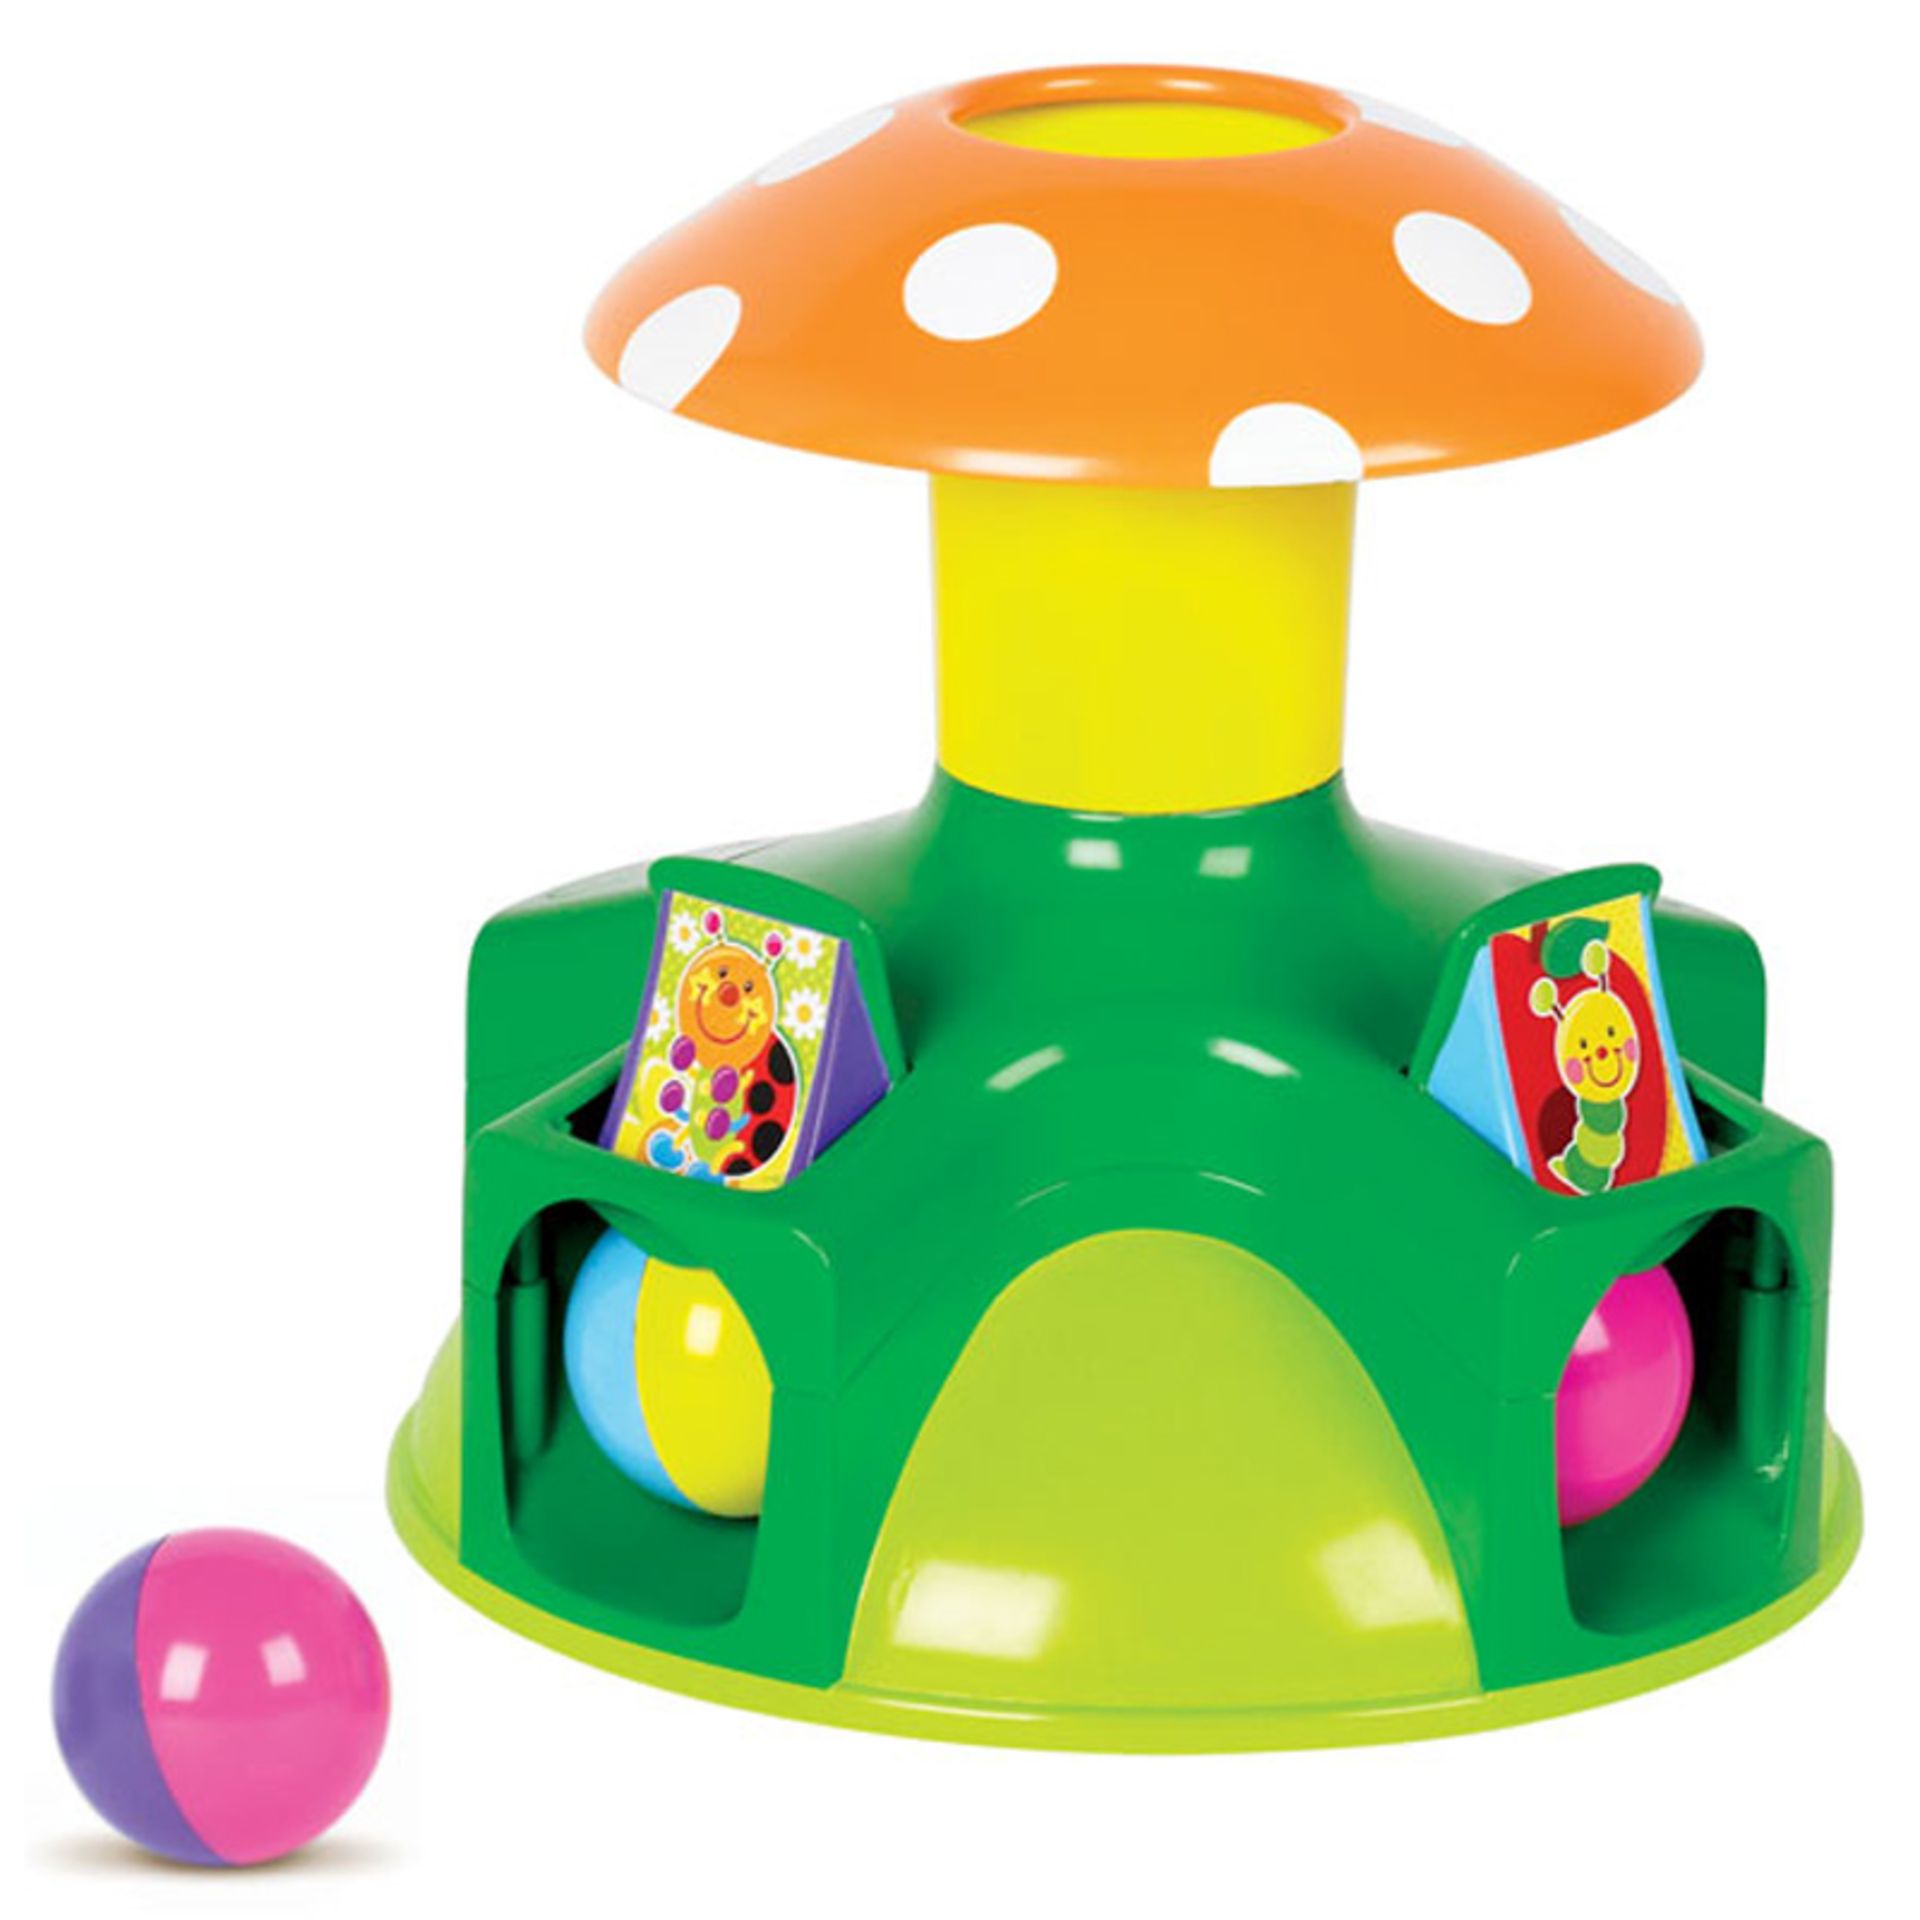 V *TRADE QTY* Brand New Tomy Play To Learn Post'n'Pop 6 Month+ RRP £19.99 (worldwideshoppingmall)